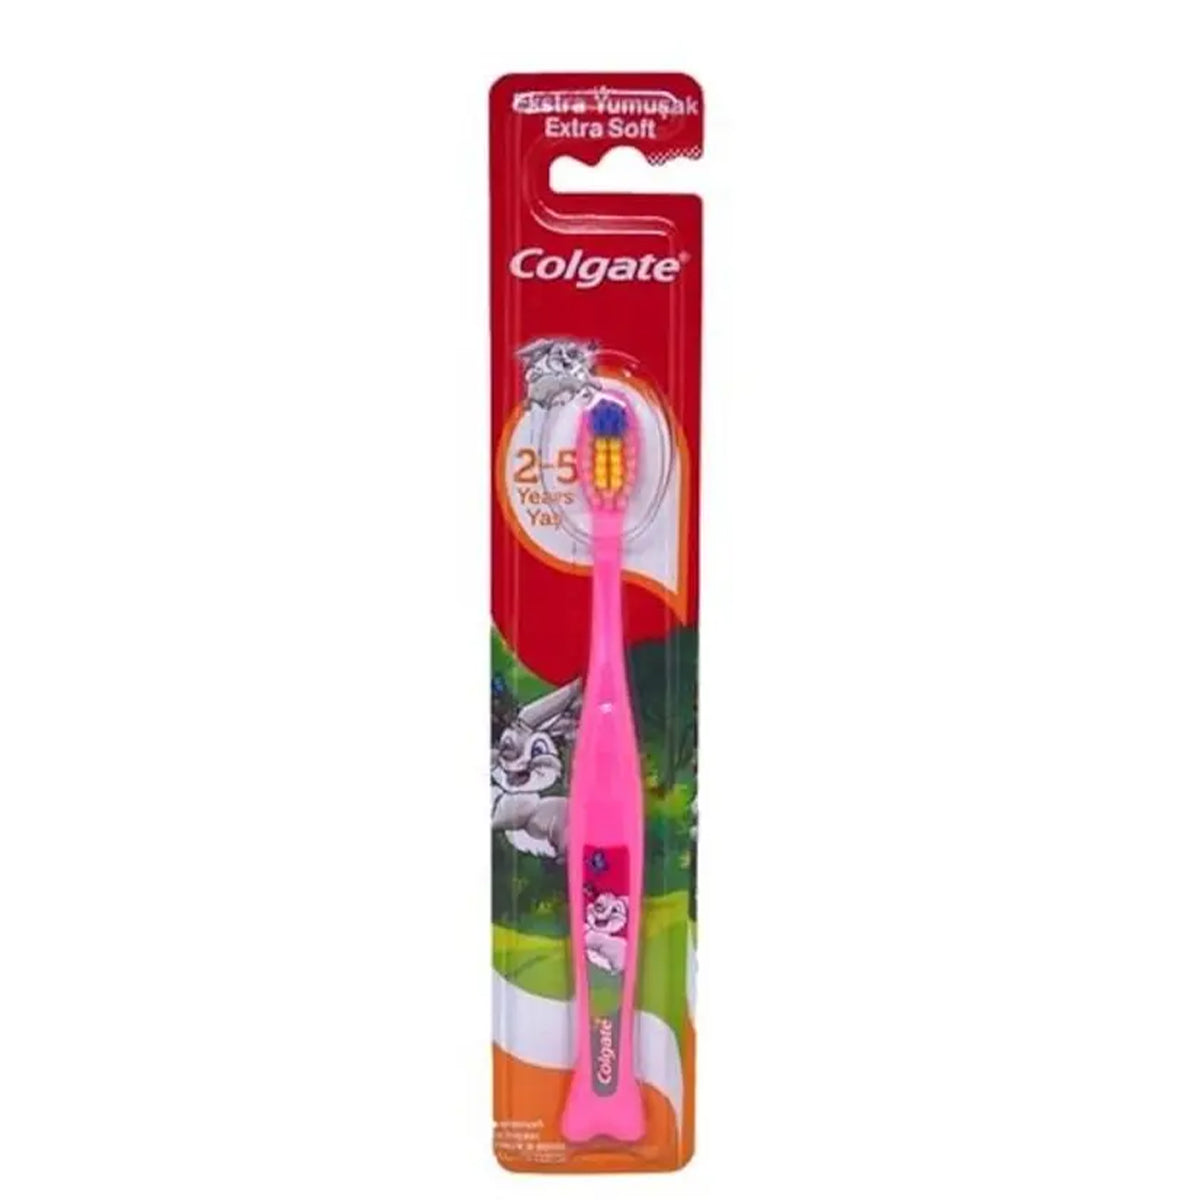 A Colgate - Extra Soft Toothbrush (Kid) - 1pcs in a package.